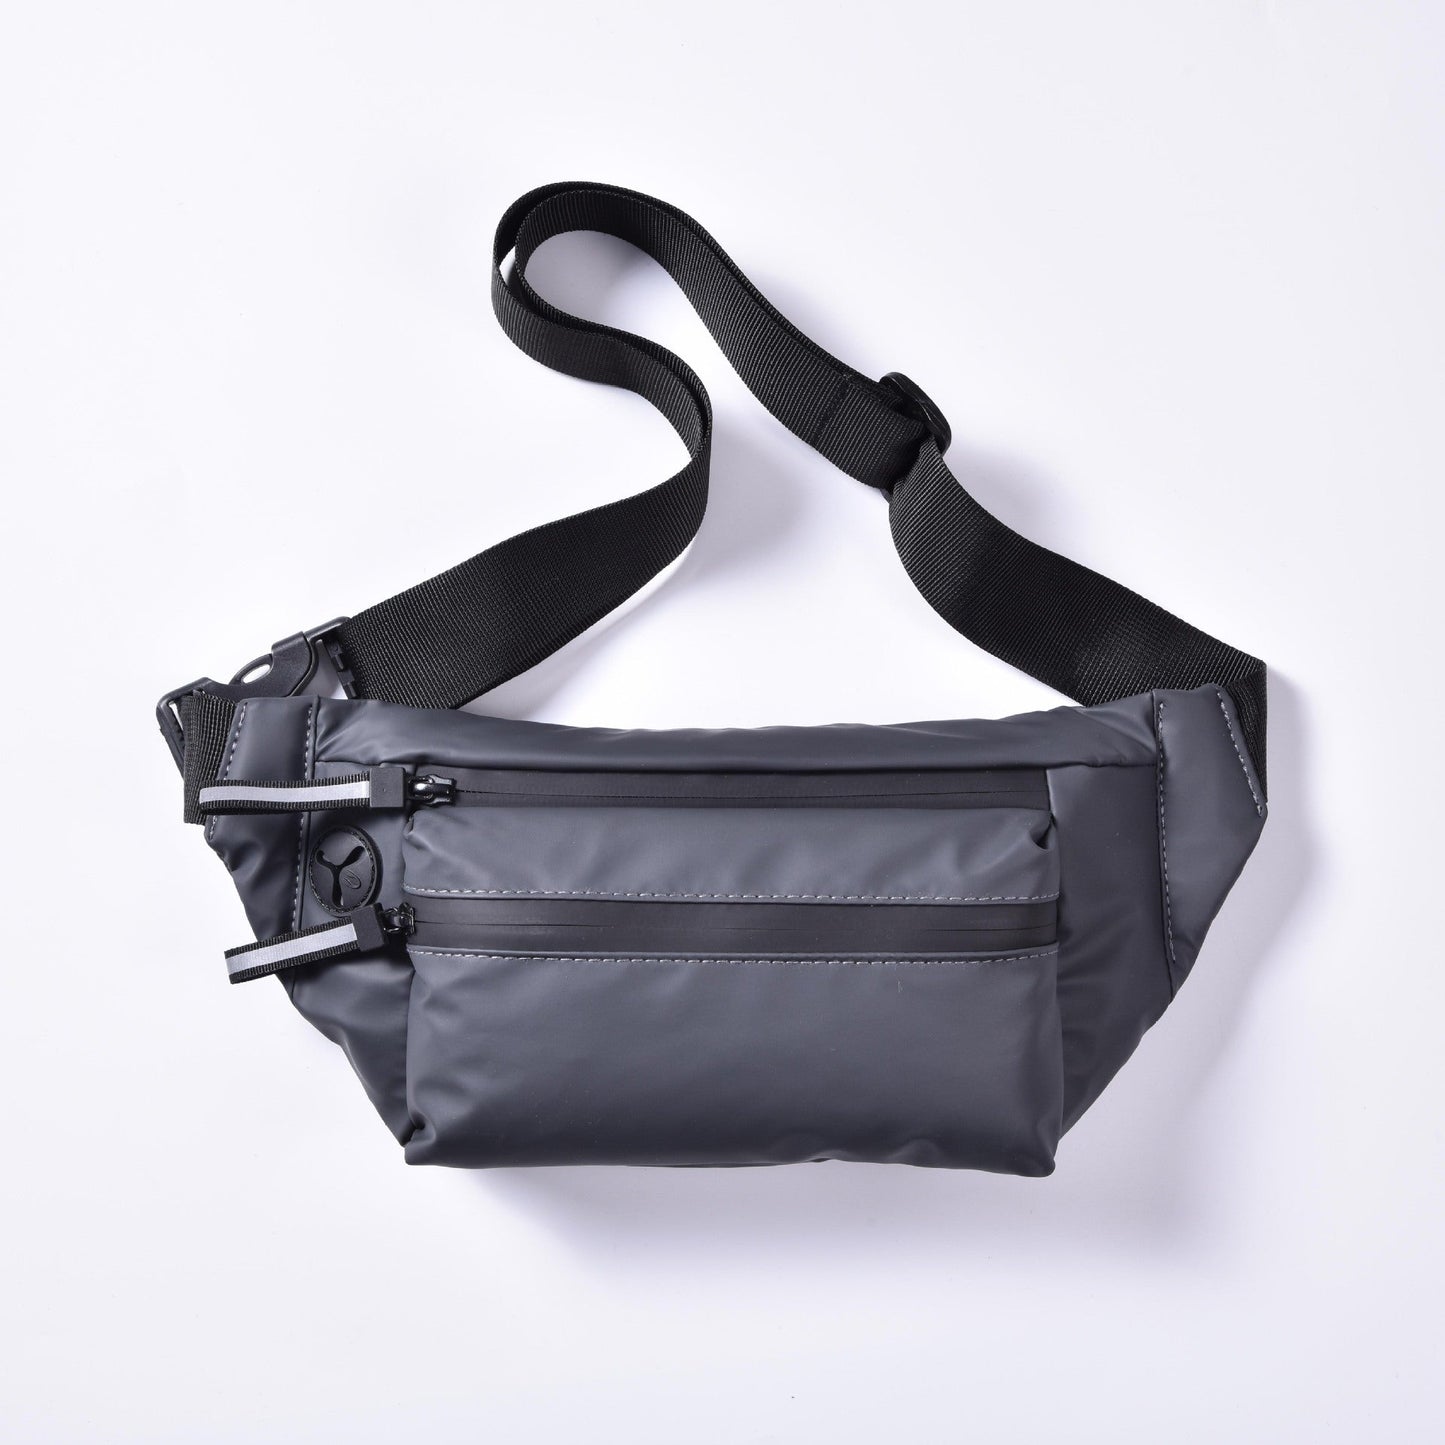 Men's Waist Chest Bag uk | waist | Introducing our Men's Waist Chest Bag, a versatile and functional accessory perfect for the modern m